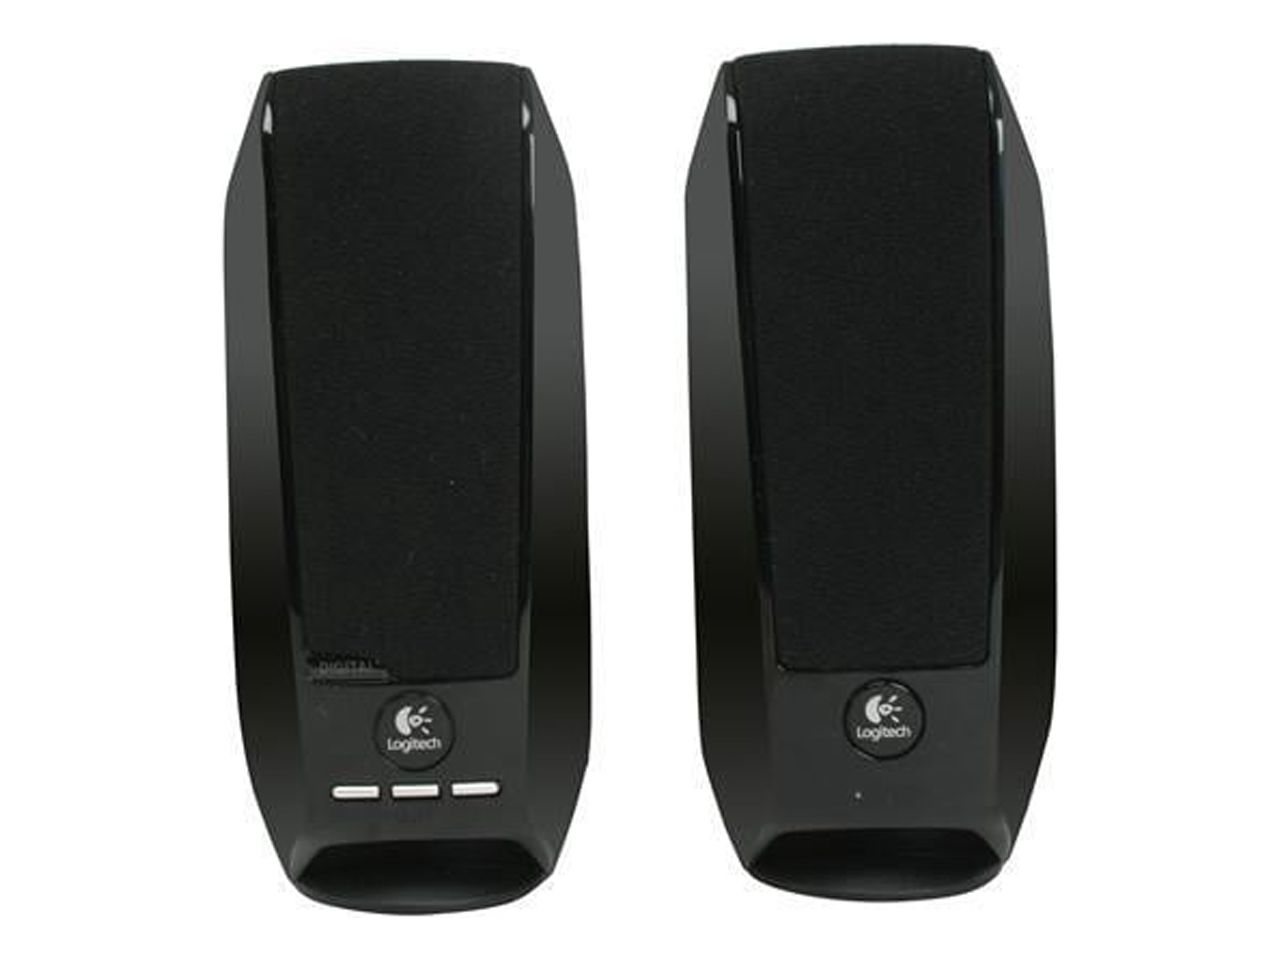 Logitech S150 USB Speakers with Digital Sound - image 4 of 5